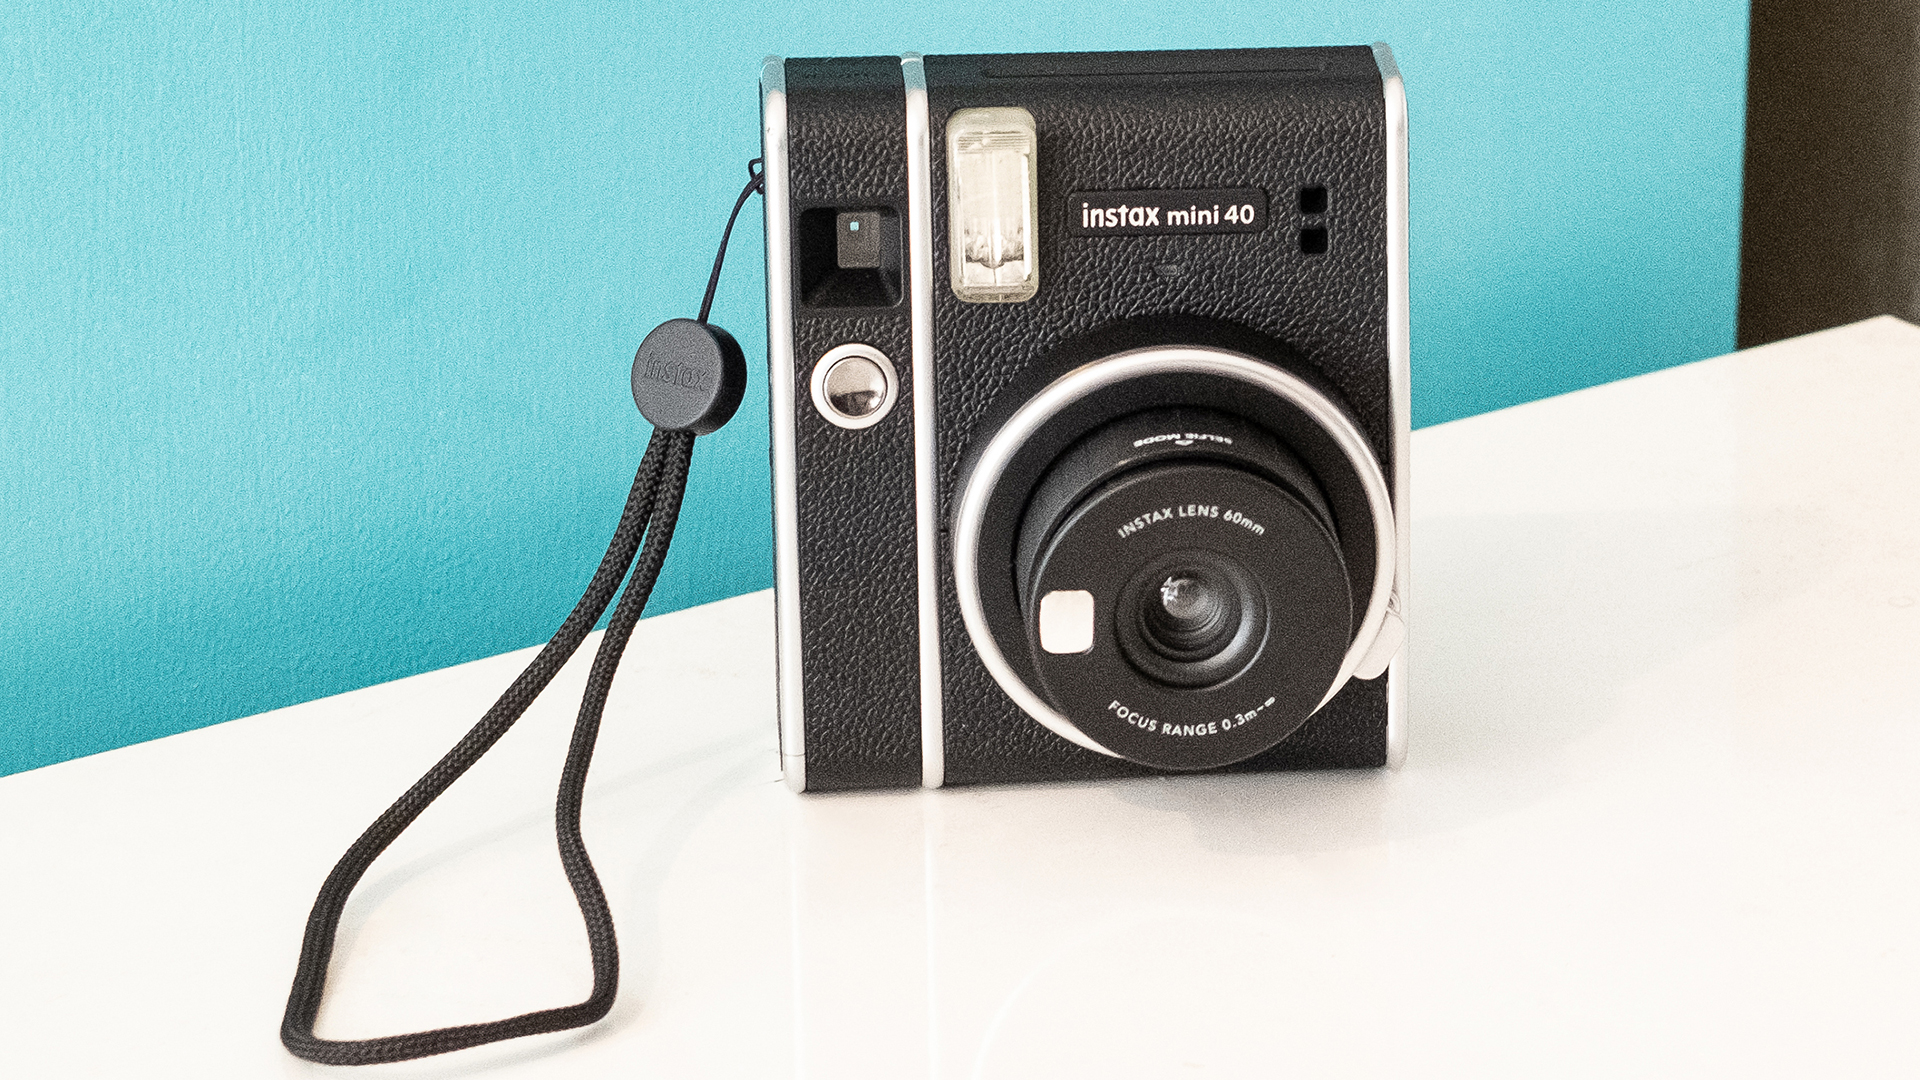 Instax mini 40 instant camera + official case designed exclusively